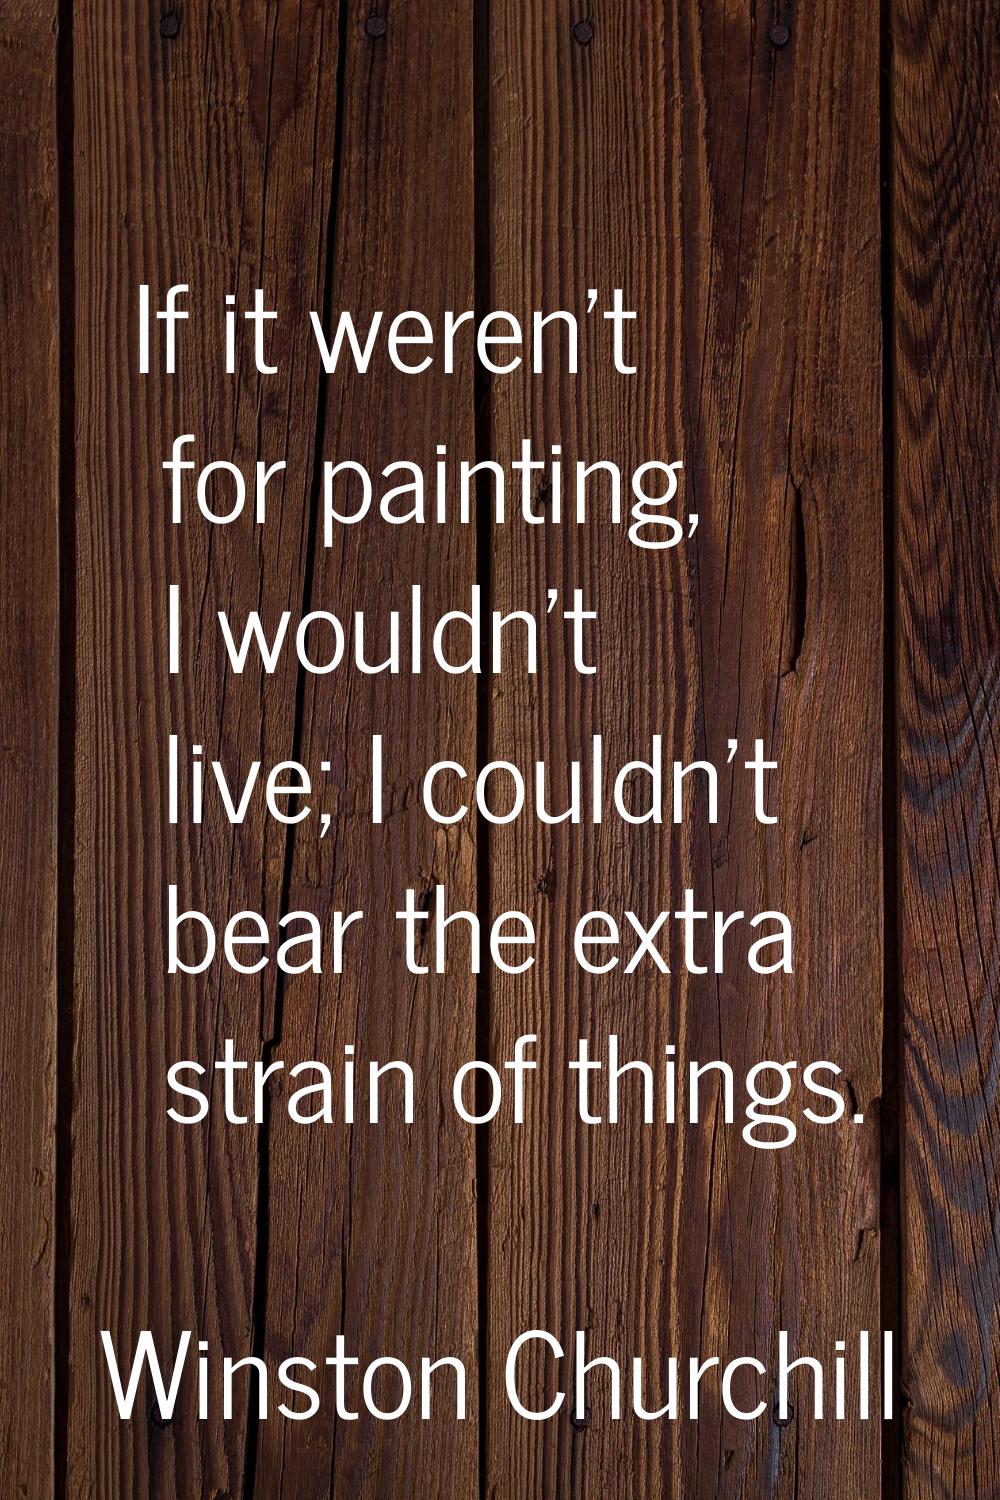 If it weren't for painting, I wouldn't live; I couldn't bear the extra strain of things.